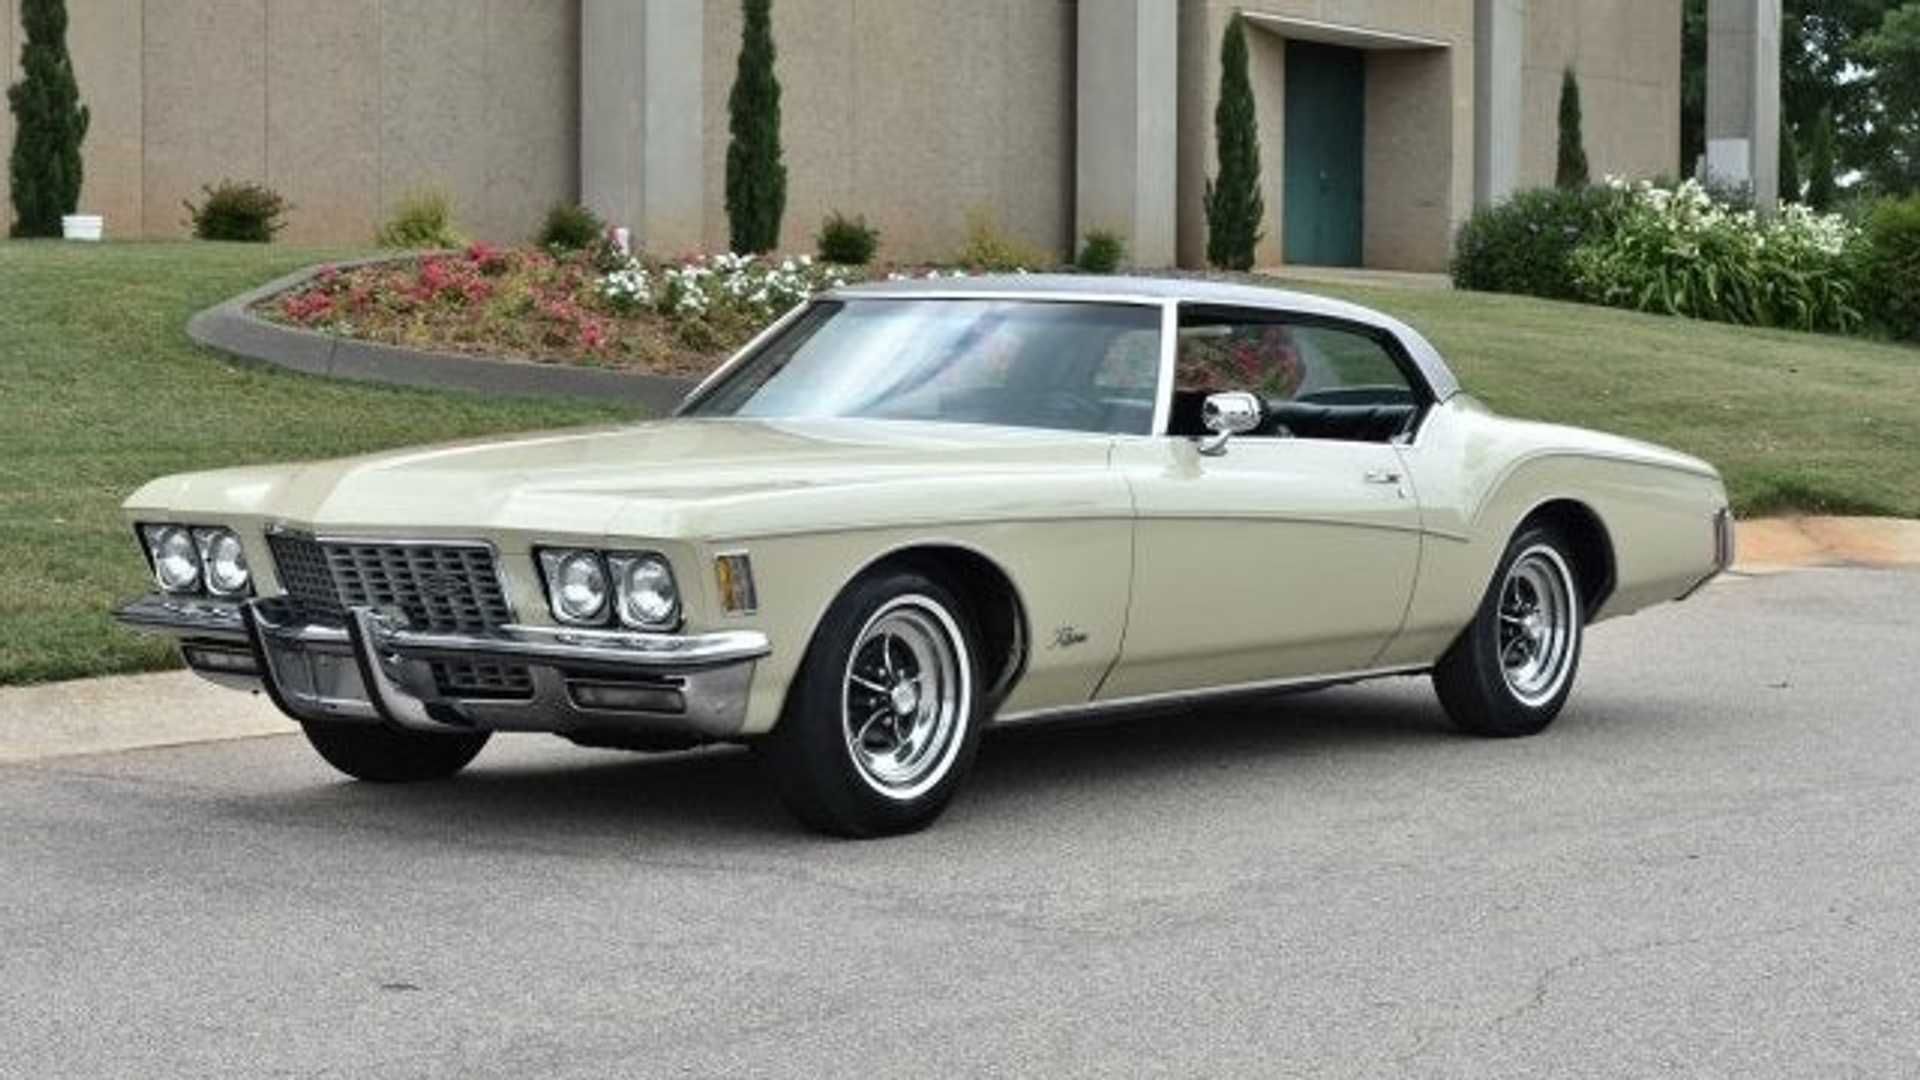 1972 Buick Riviera parked outside